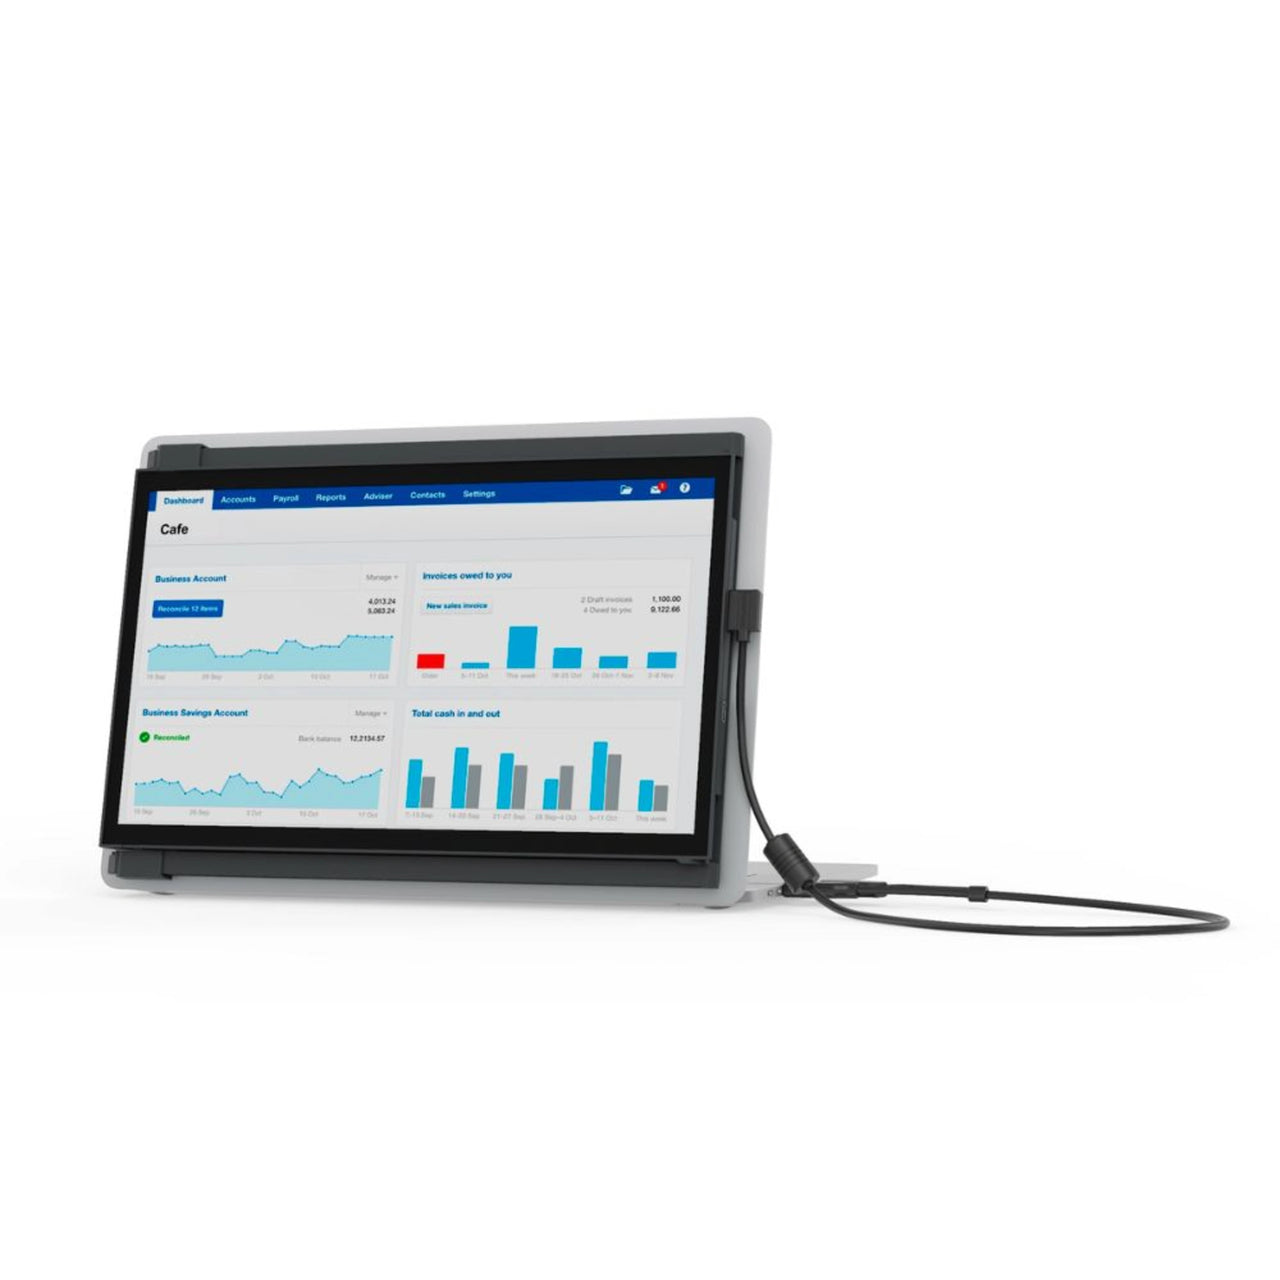 Mobile Pixels Duex Plus Portable Laptop Monitor 13.3" (Grey) available in Australia from Sammat Education